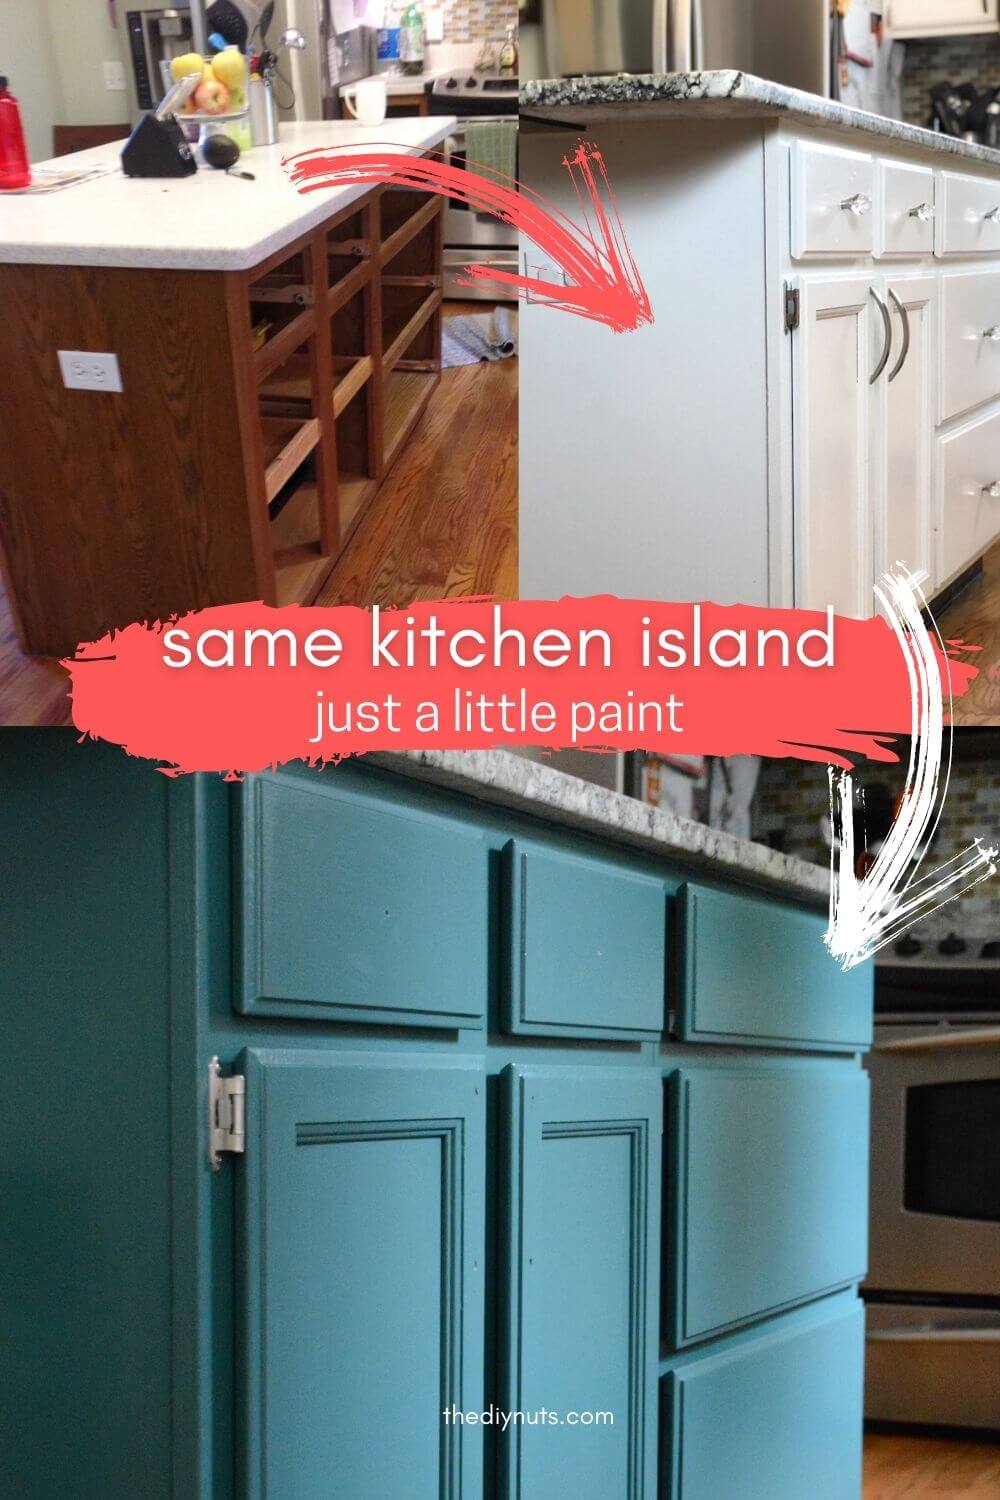 how to repaint painted cabinets (our green kitchen cabinets) - the